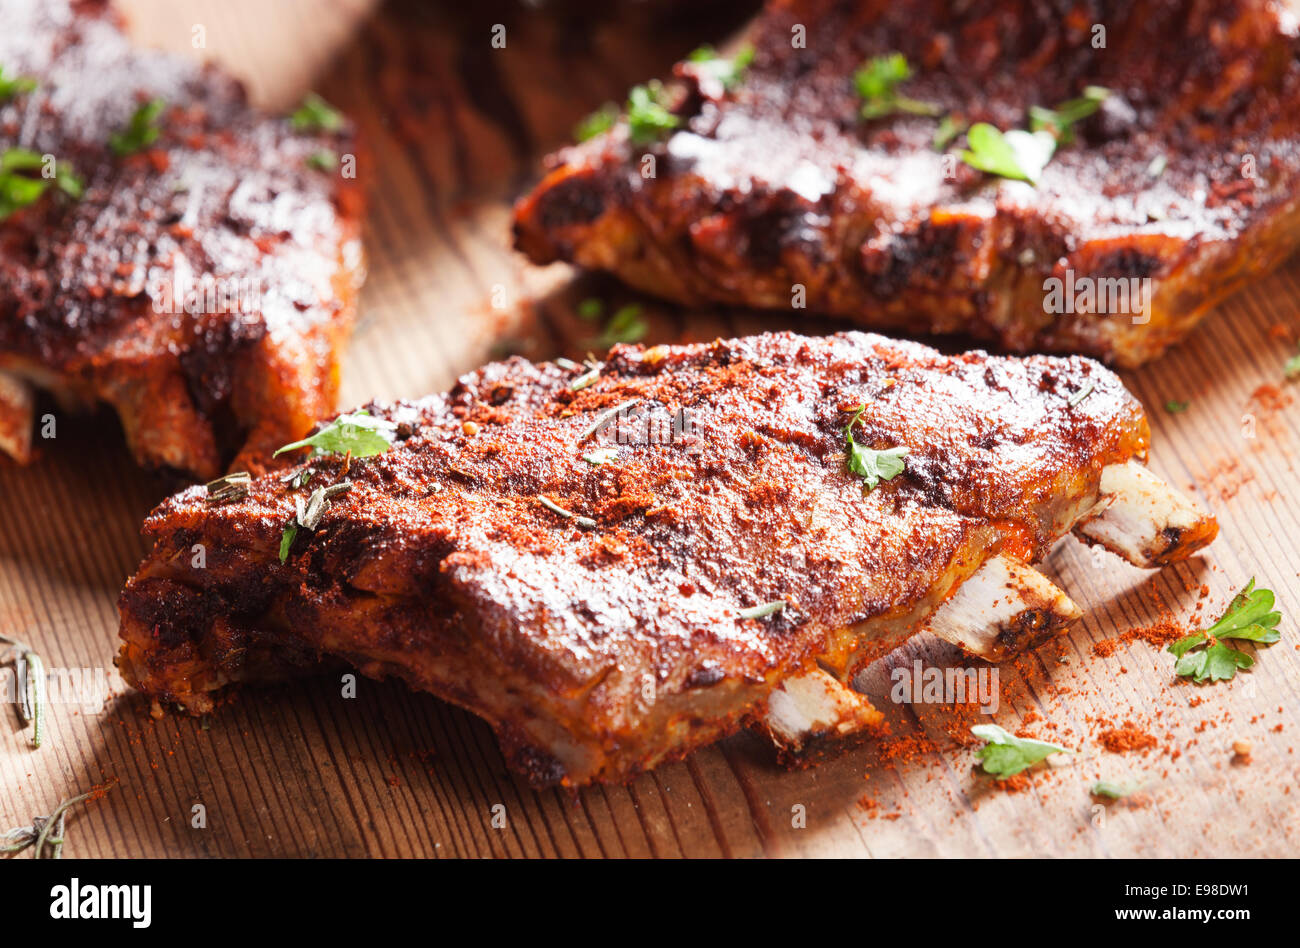 Close up of a portion of barbecued grilled ribs seasoned with hot spices and fresh herbs on a wooden board Stock Photo